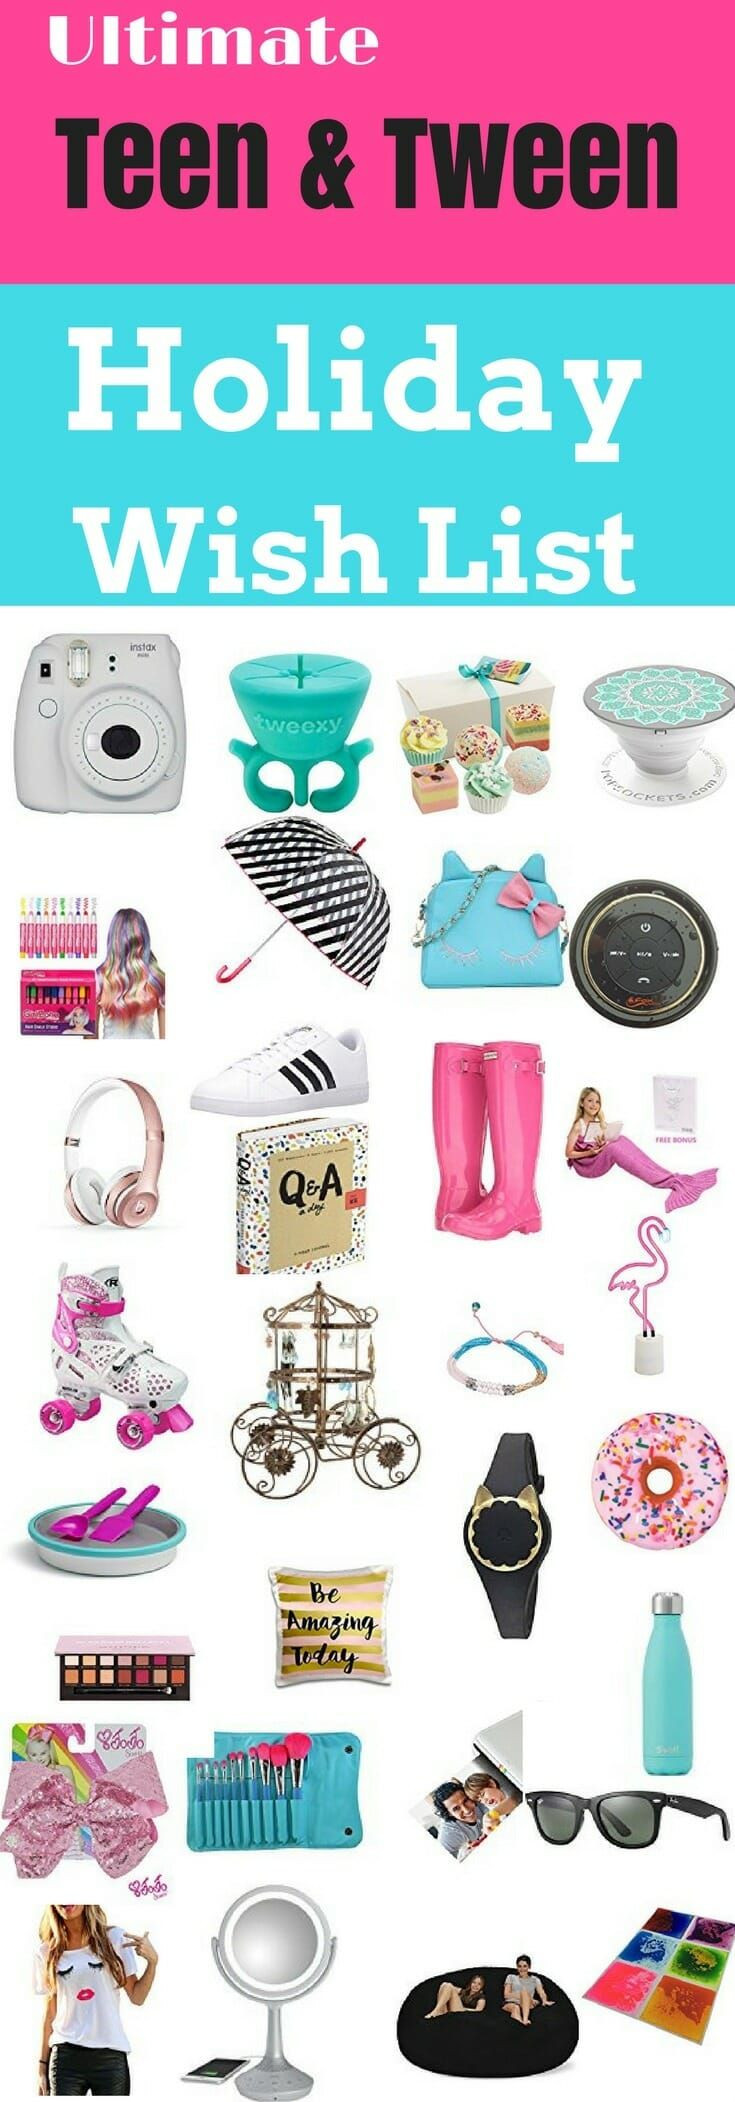 Cool Gift Ideas For Teenage Girls
 Gifts for Teenage Girls Under $20 Affordable Christmas